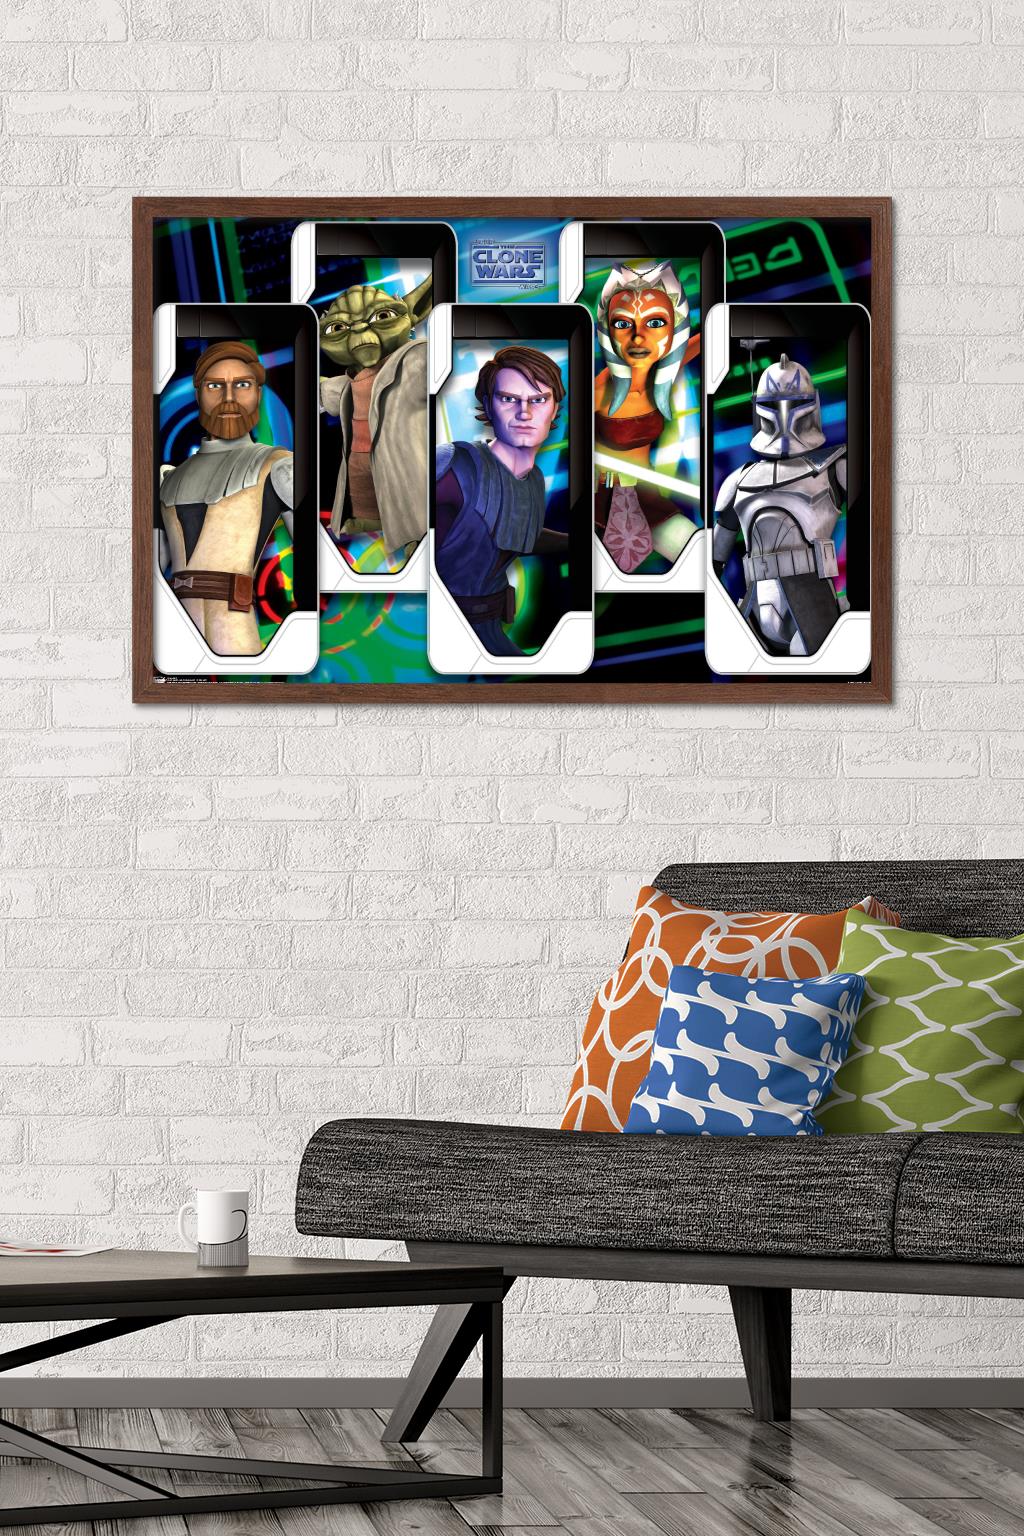 Star Wars: The Clone Wars - Close Ups Wall Poster, 22.375" x 34", Framed - image 2 of 6